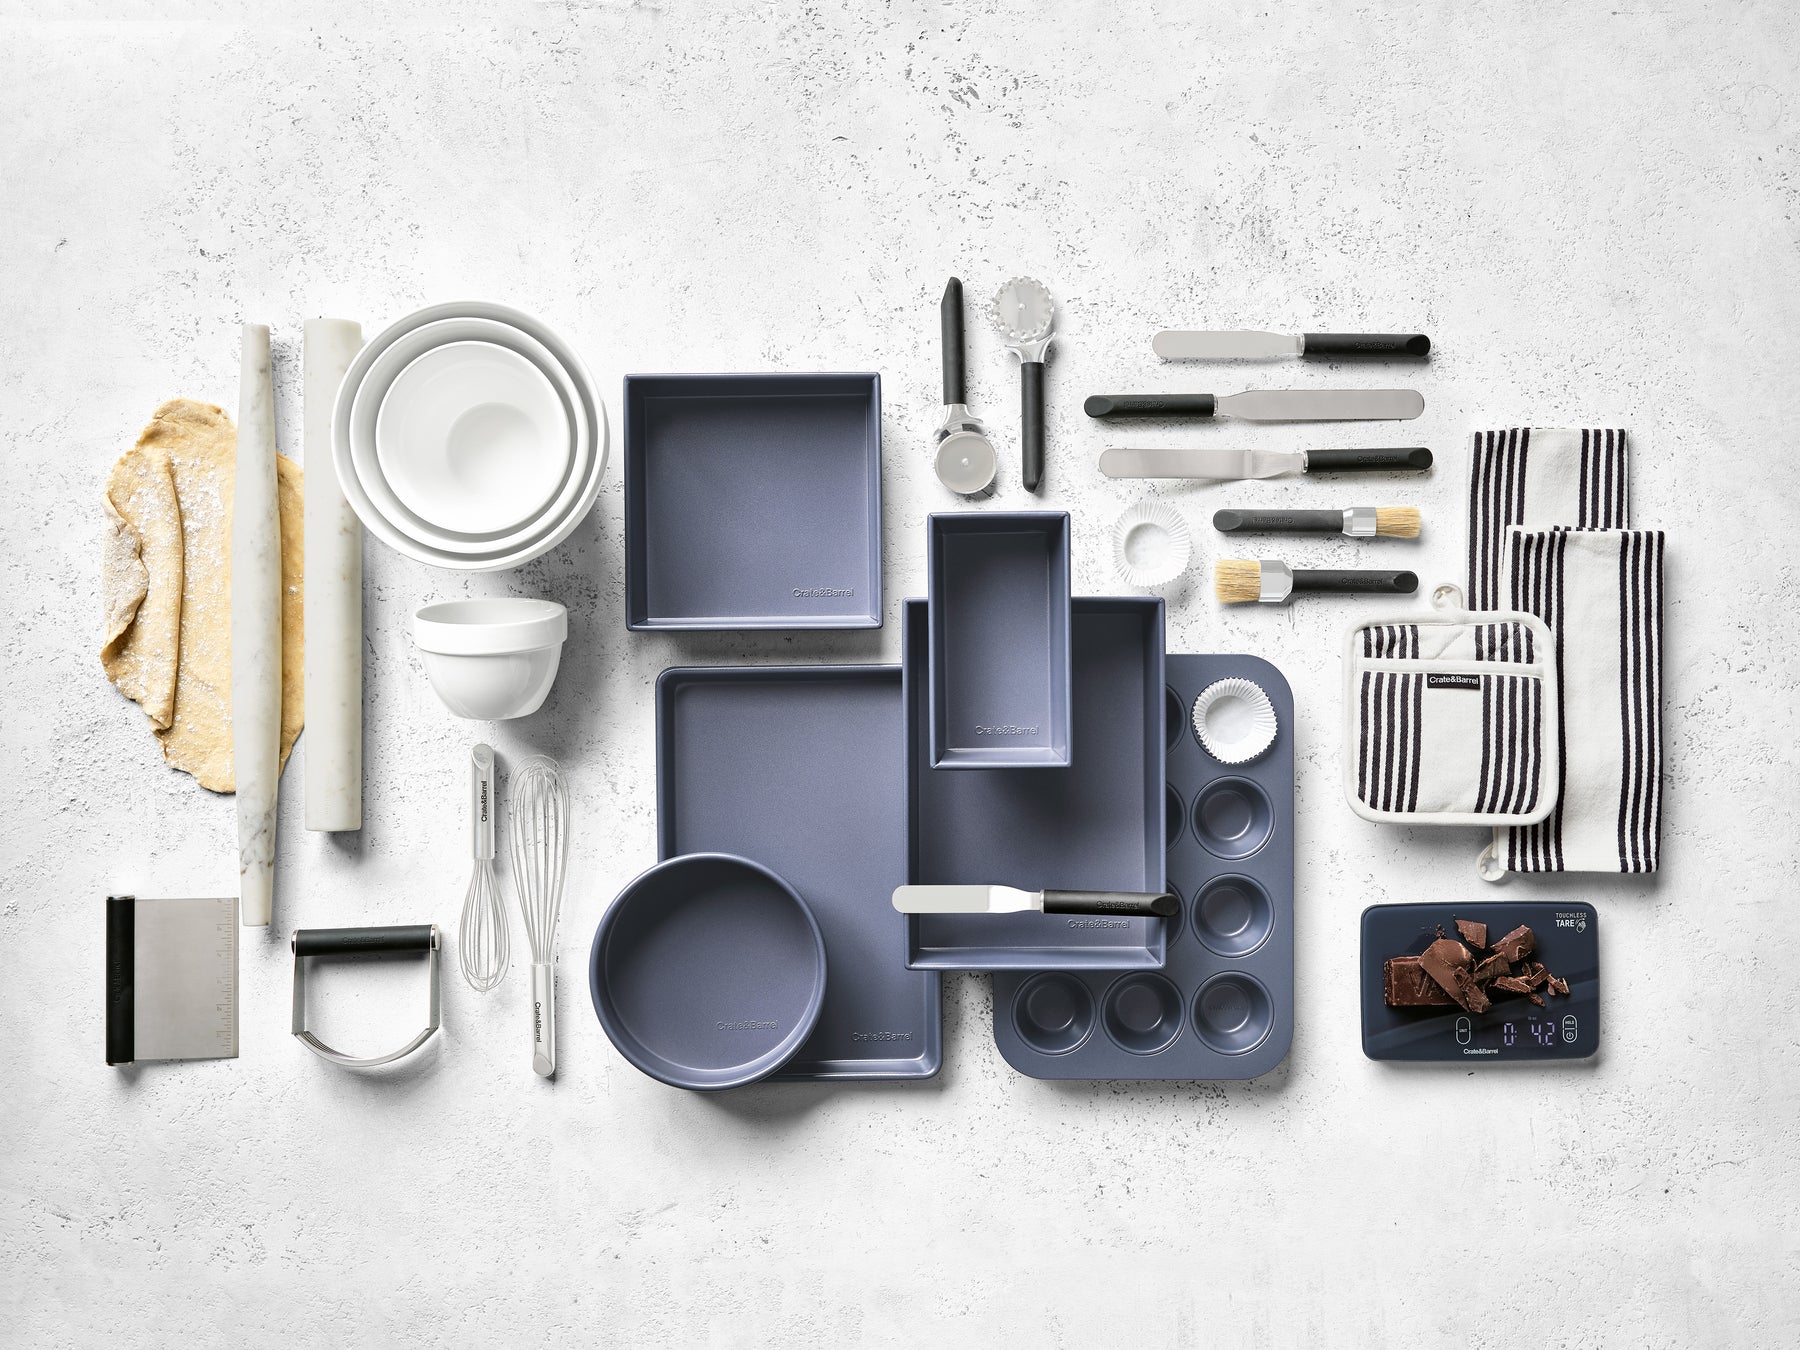 Essential Baking Equipment for Home Bakers: A Bakeware Buying Guide